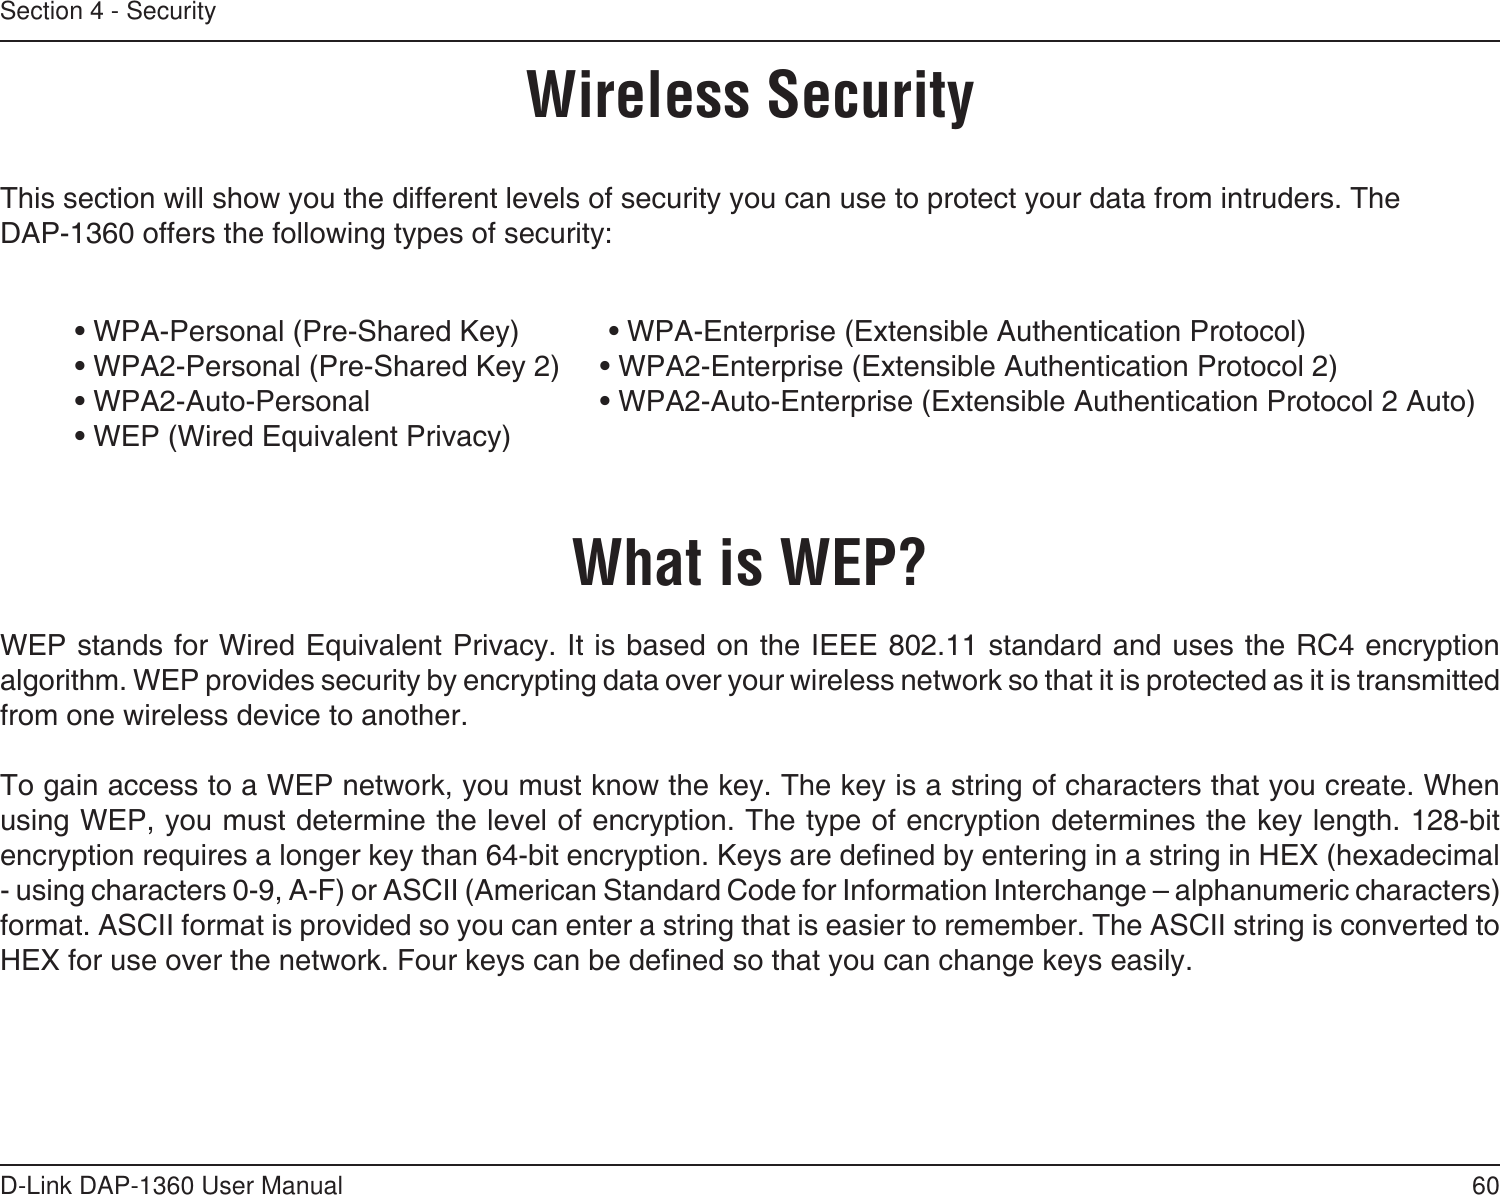 60D-Link DAP-1360 User ManualSection 4 - SecurityWireless SecurityThis section will show you the different levels of security you can use to protect your data from intruders. The DAP-1360 offers the following types of security:  • WPA-Personal (Pre-Shared Key)           • WPA-Enterprise (Extensible Authentication Protocol)  • WPA2-Personal (Pre-Shared Key 2)  • WPA2-Enterprise (Extensible Authentication Protocol 2)  • WPA2-Auto-Personal       • WPA2-Auto-Enterprise (Extensible Authentication Protocol 2 Auto)  • WEP (Wired Equivalent Privacy)What is WEP?WEP stands for Wired Equivalent Privacy. It is based on the IEEE 802.11 standard and uses the RC4 encryption algorithm. WEP provides security by encrypting data over your wireless network so that it is protected as it is transmitted from one wireless device to another.To gain access to a WEP network, you must know the key. The key is a string of characters that you create. When using WEP, you must determine the level of encryption. The type of encryption determines the key length. 128-bit encryption requires a longer key than 64-bit encryption. Keys are dened by entering in a string in HEX (hexadecimal - using characters 0-9, A-F) or ASCII (American Standard Code for Information Interchange – alphanumeric characters) format. ASCII format is provided so you can enter a string that is easier to remember. The ASCII string is converted to HEX for use over the network. Four keys can be dened so that you can change keys easily.